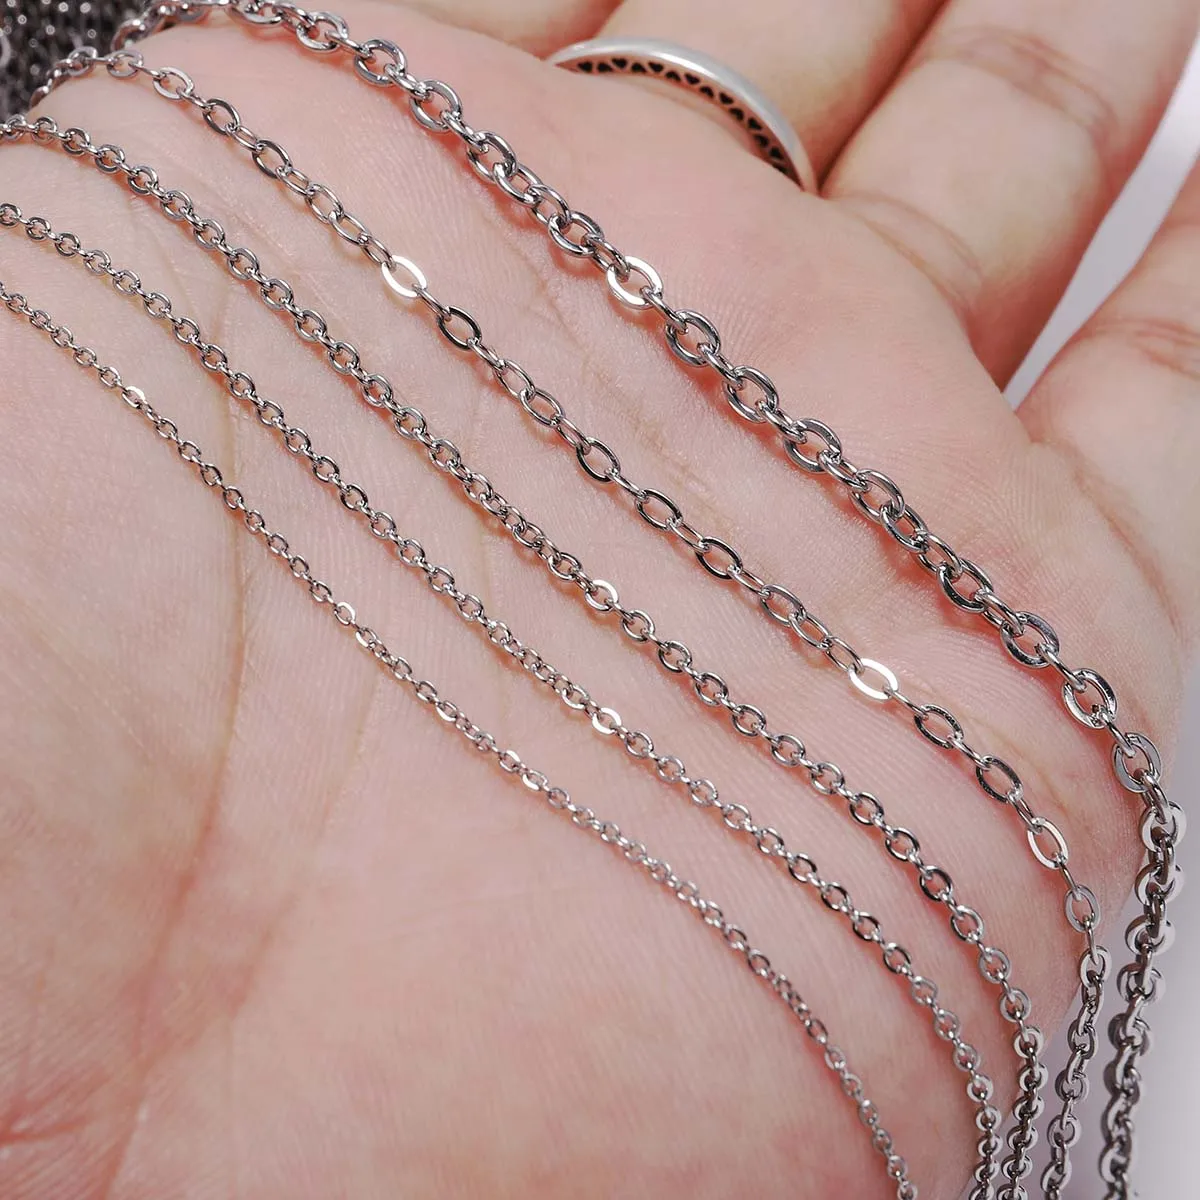 

5M/Lot 1.2-3.0mm Stainless Steel Extending Chains Bulk Necklace Chains For DIY Jewelry Making Findings Supplies Accessories